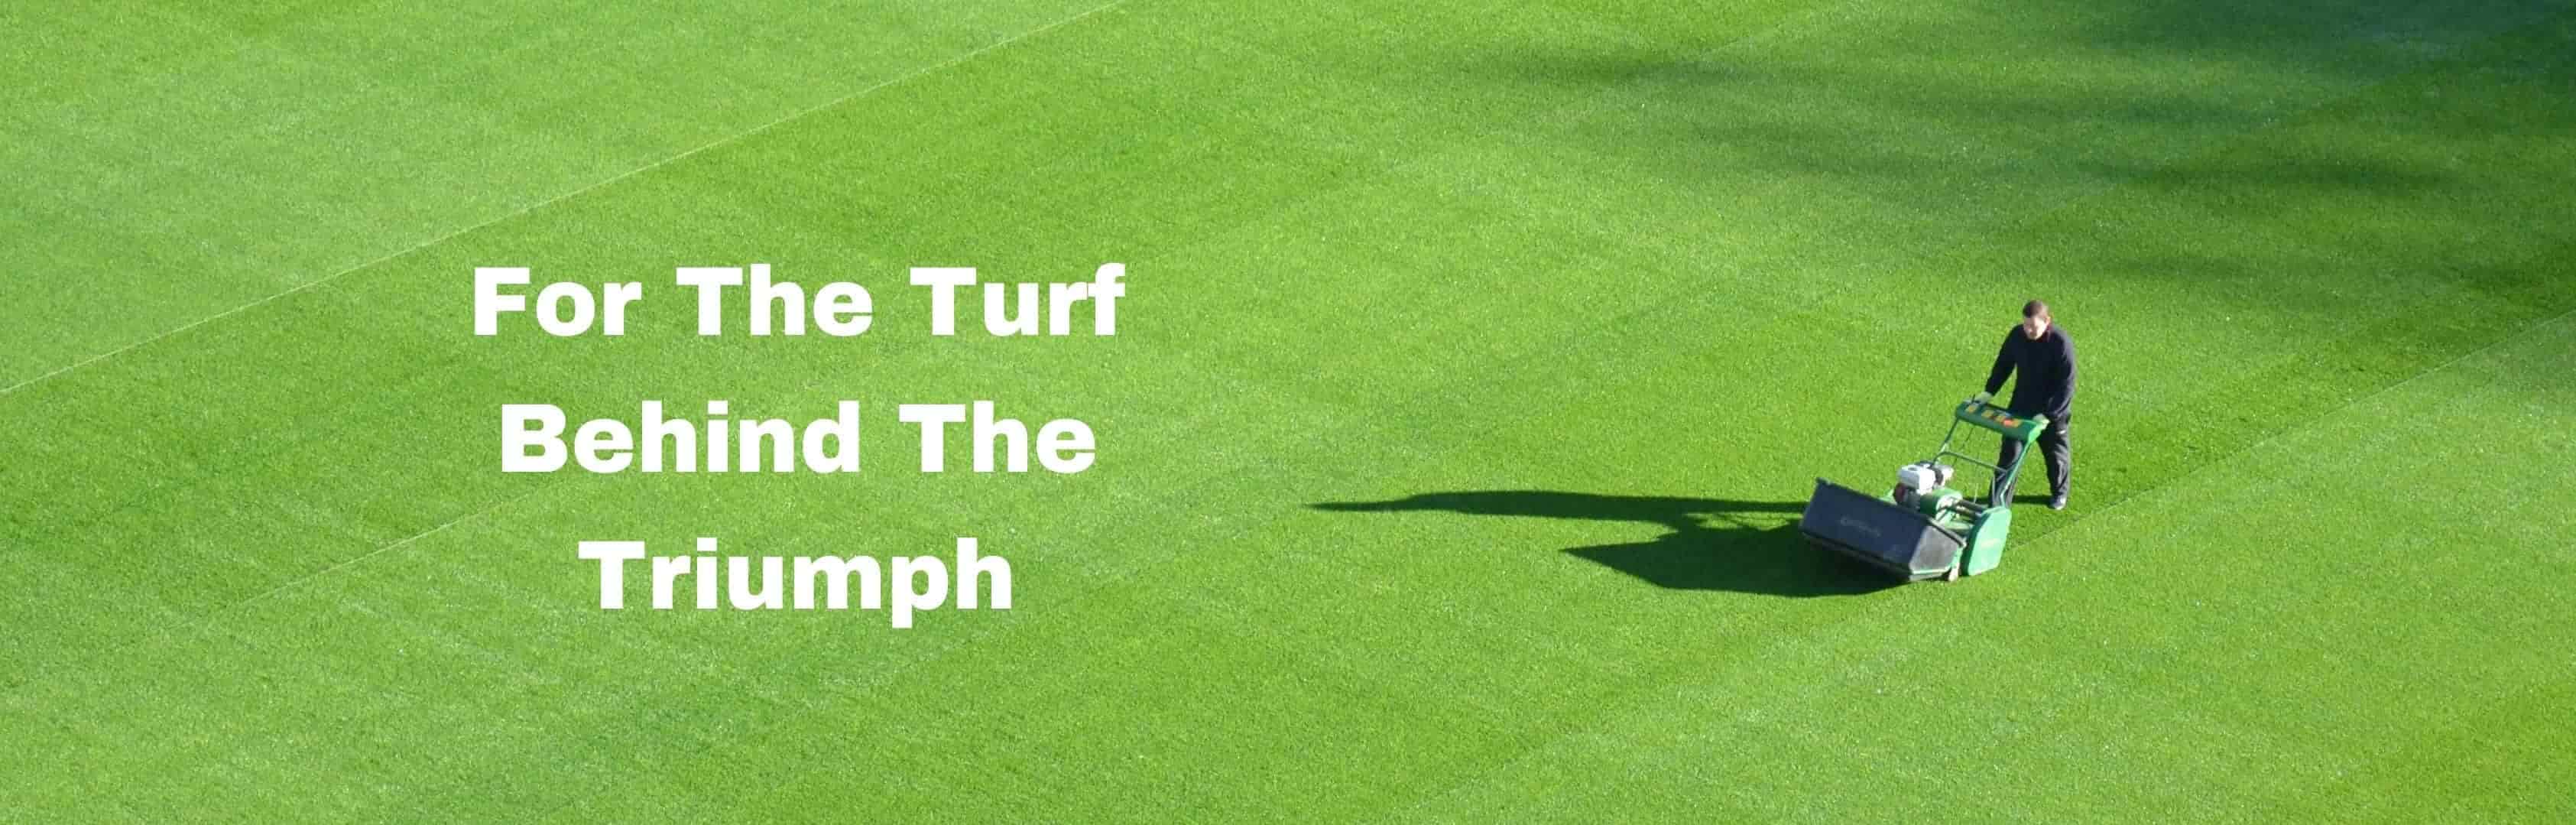 sports-turf-with-lawnmower